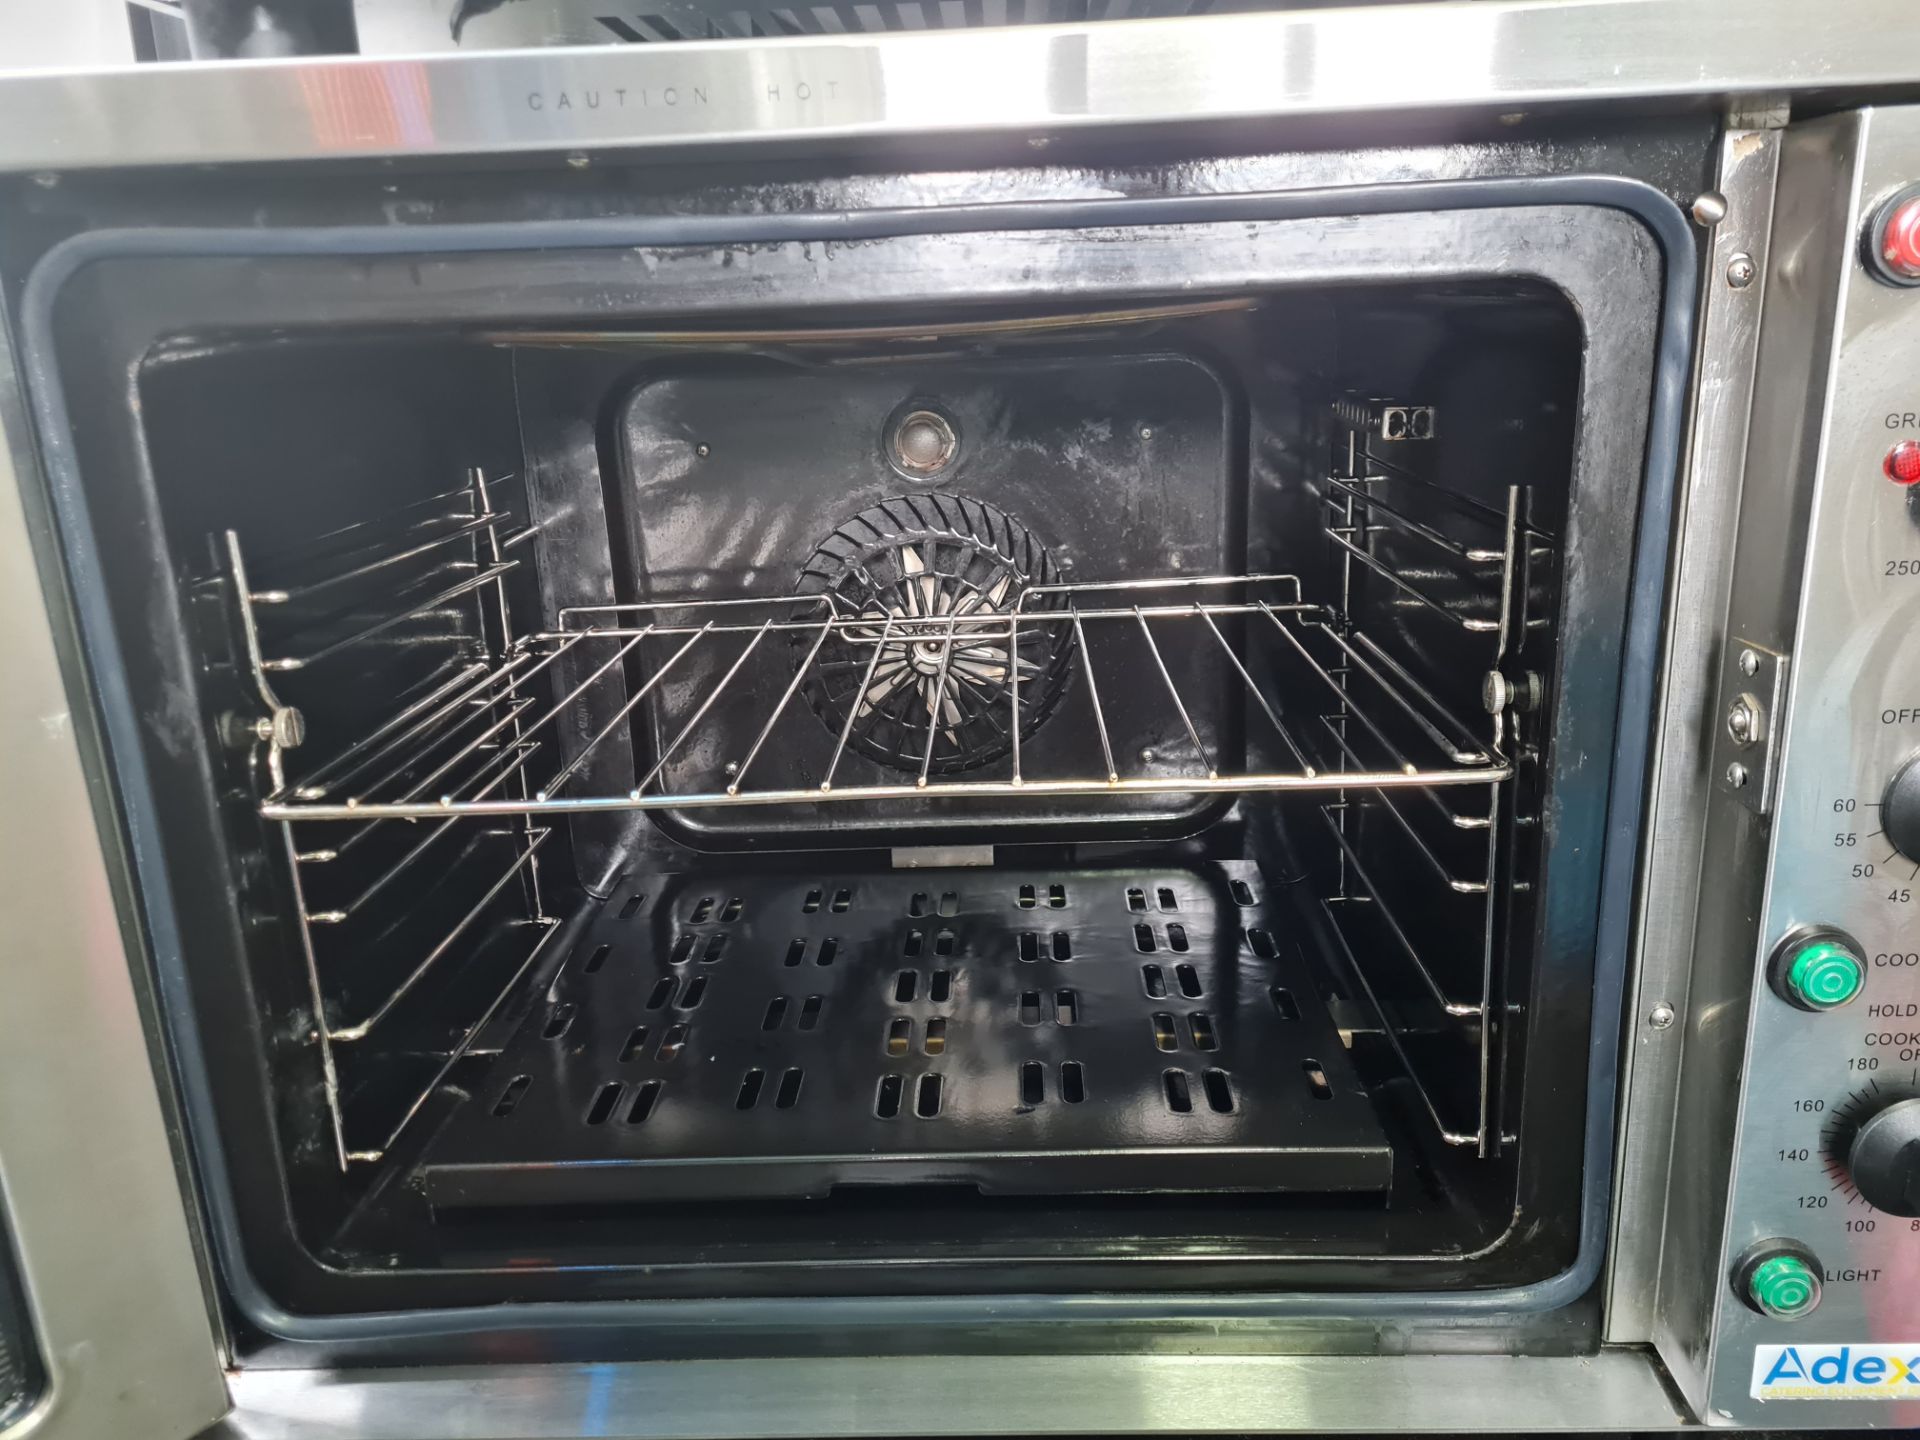 Adexa Convection Oven - Image 14 of 16